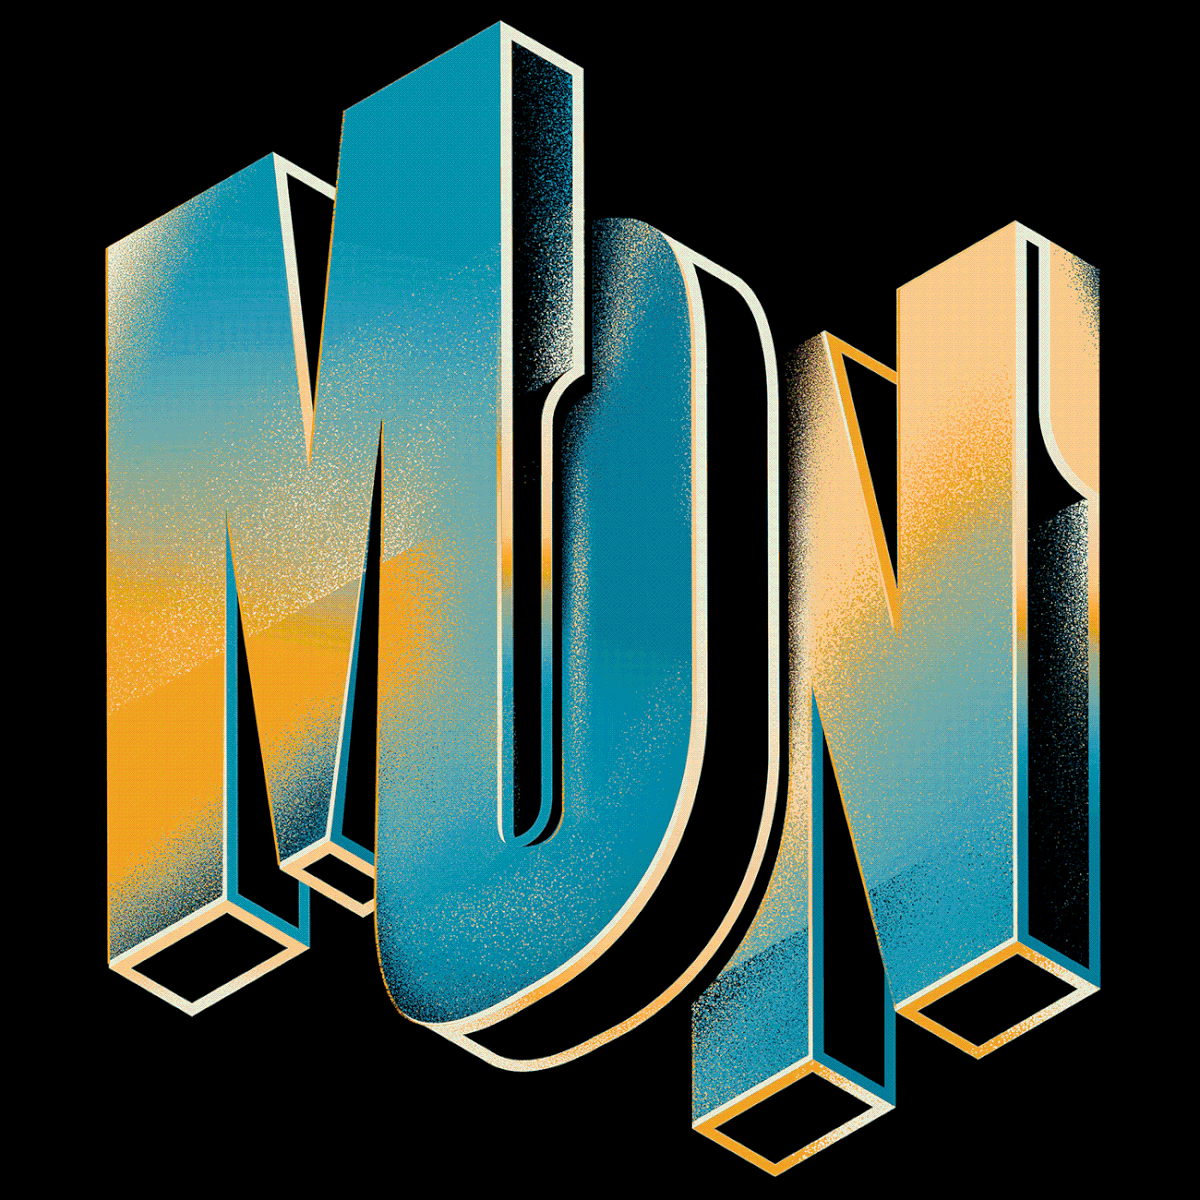 color Create design experiment lettering letters linework texture type weekdays